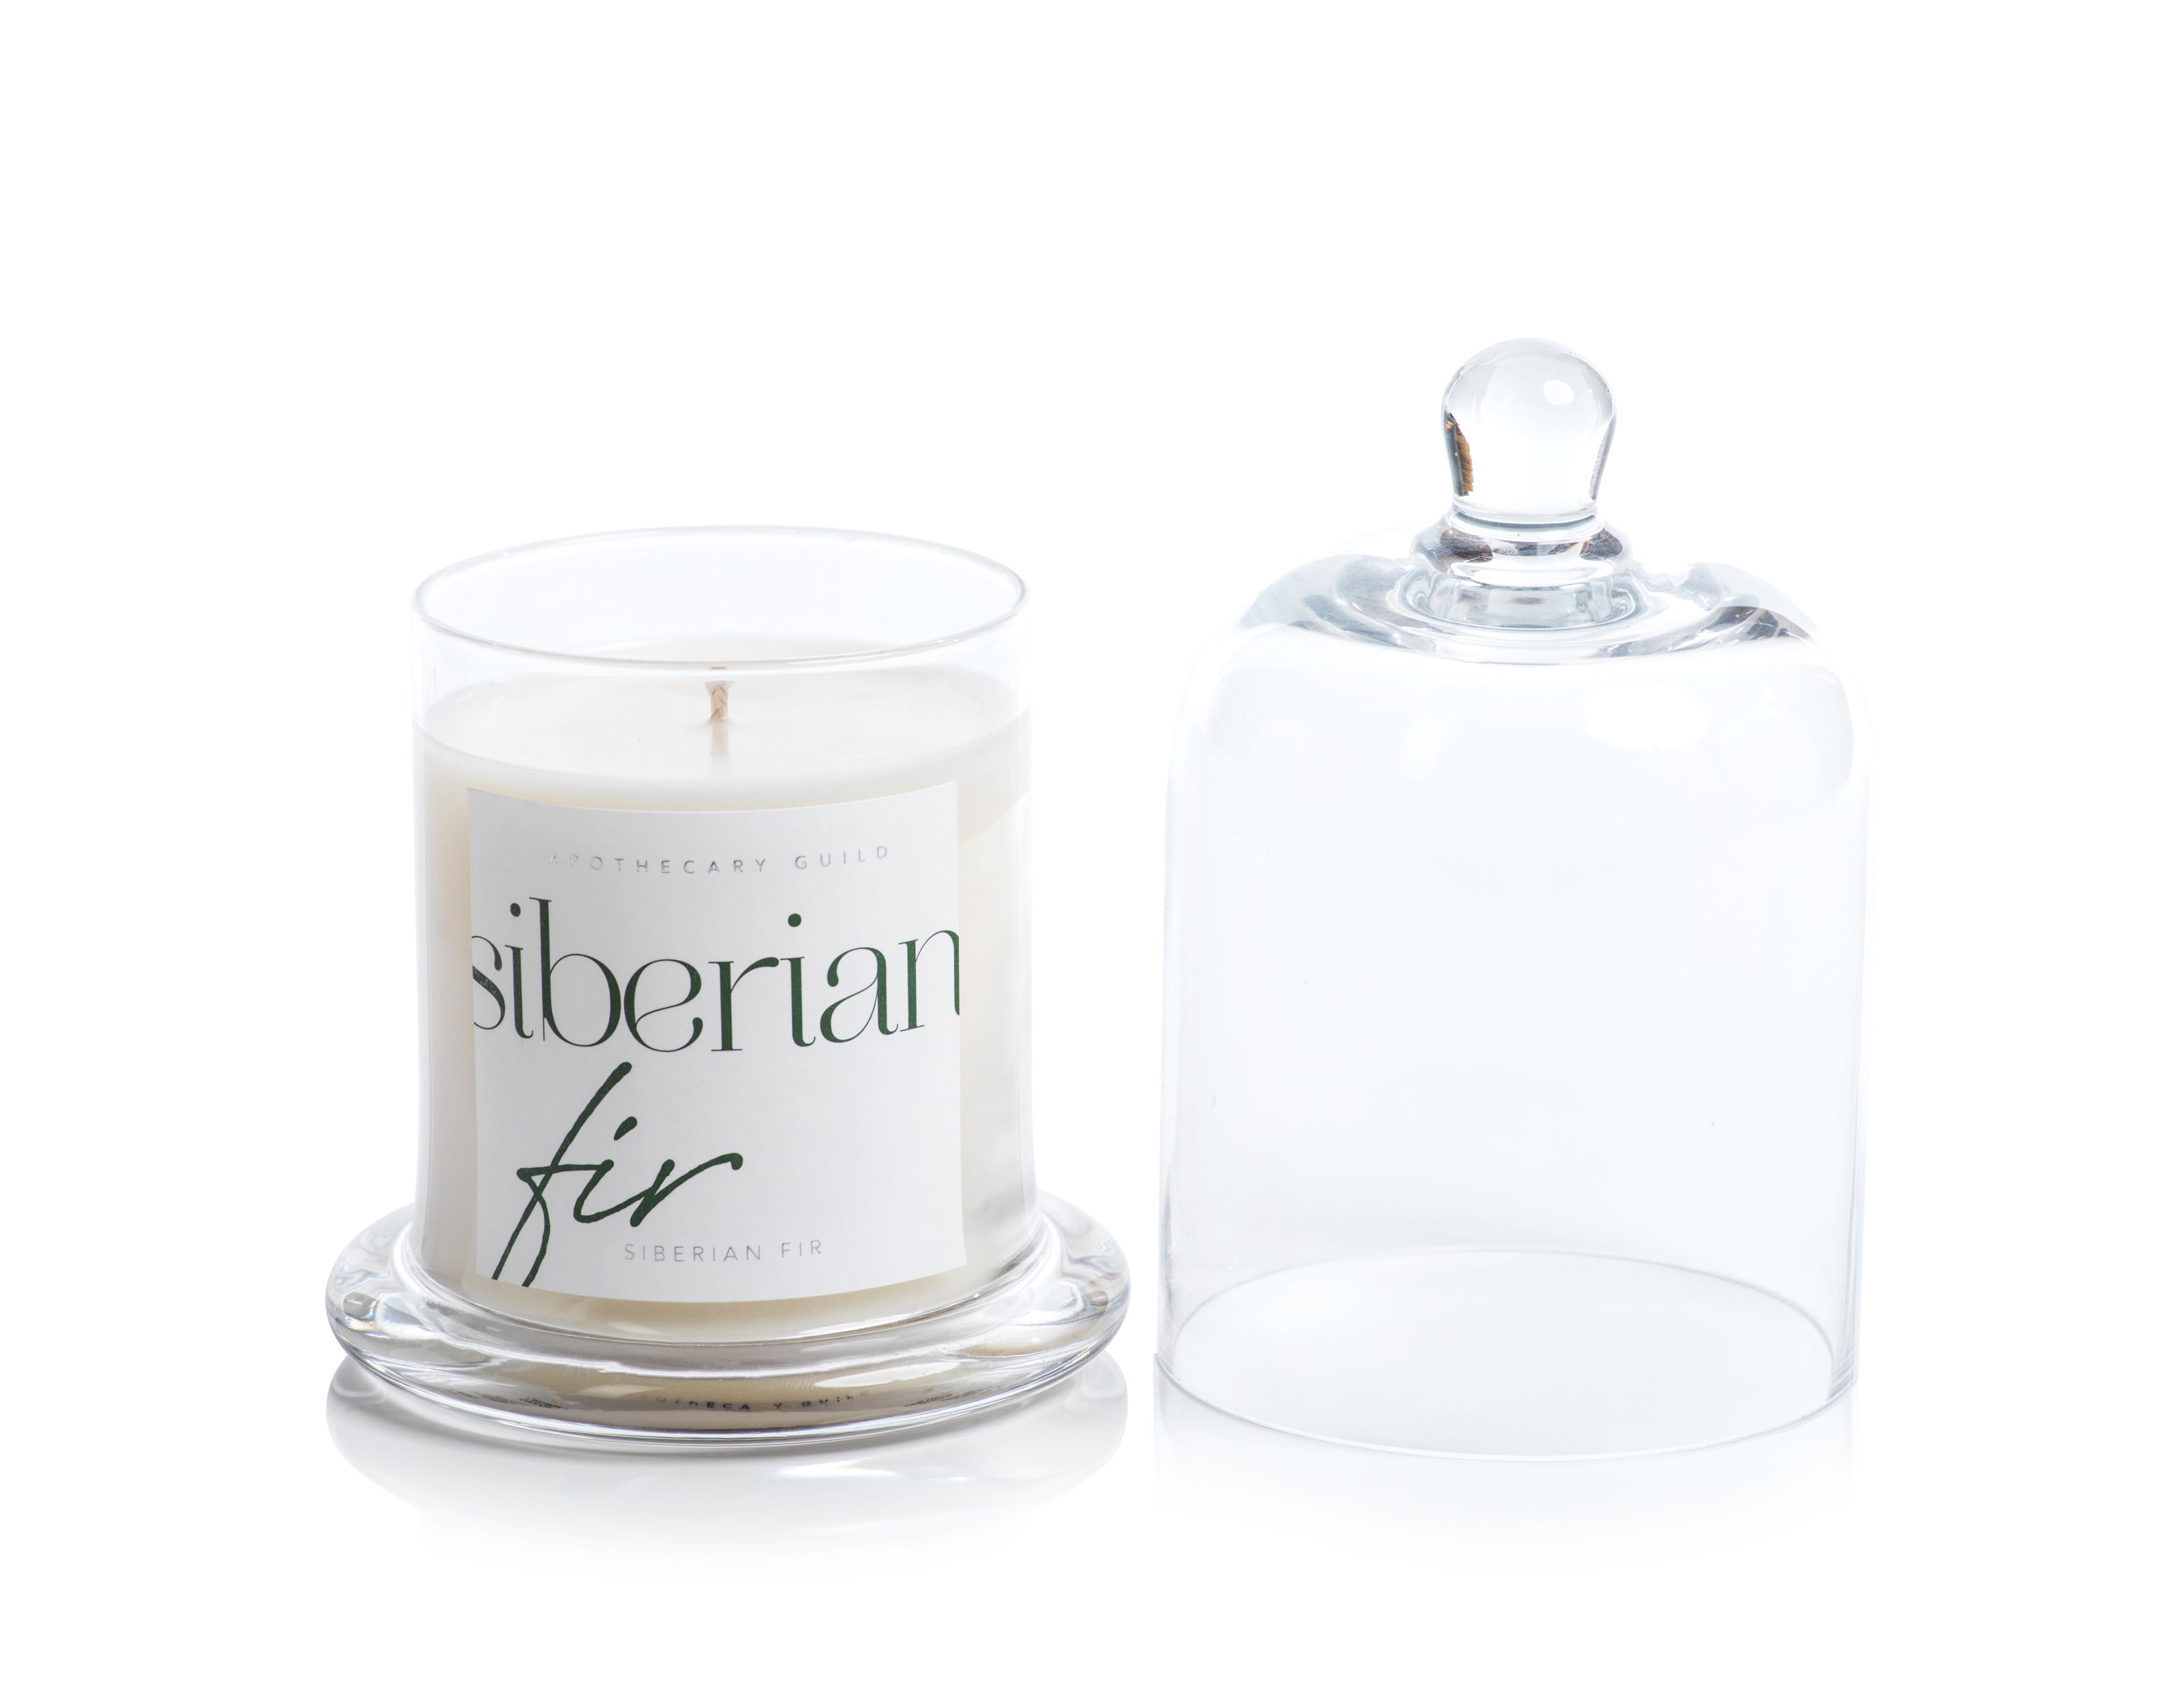 Siberian Fir Candle Dome Jar and Travel Tin - CARLYLE AVENUE